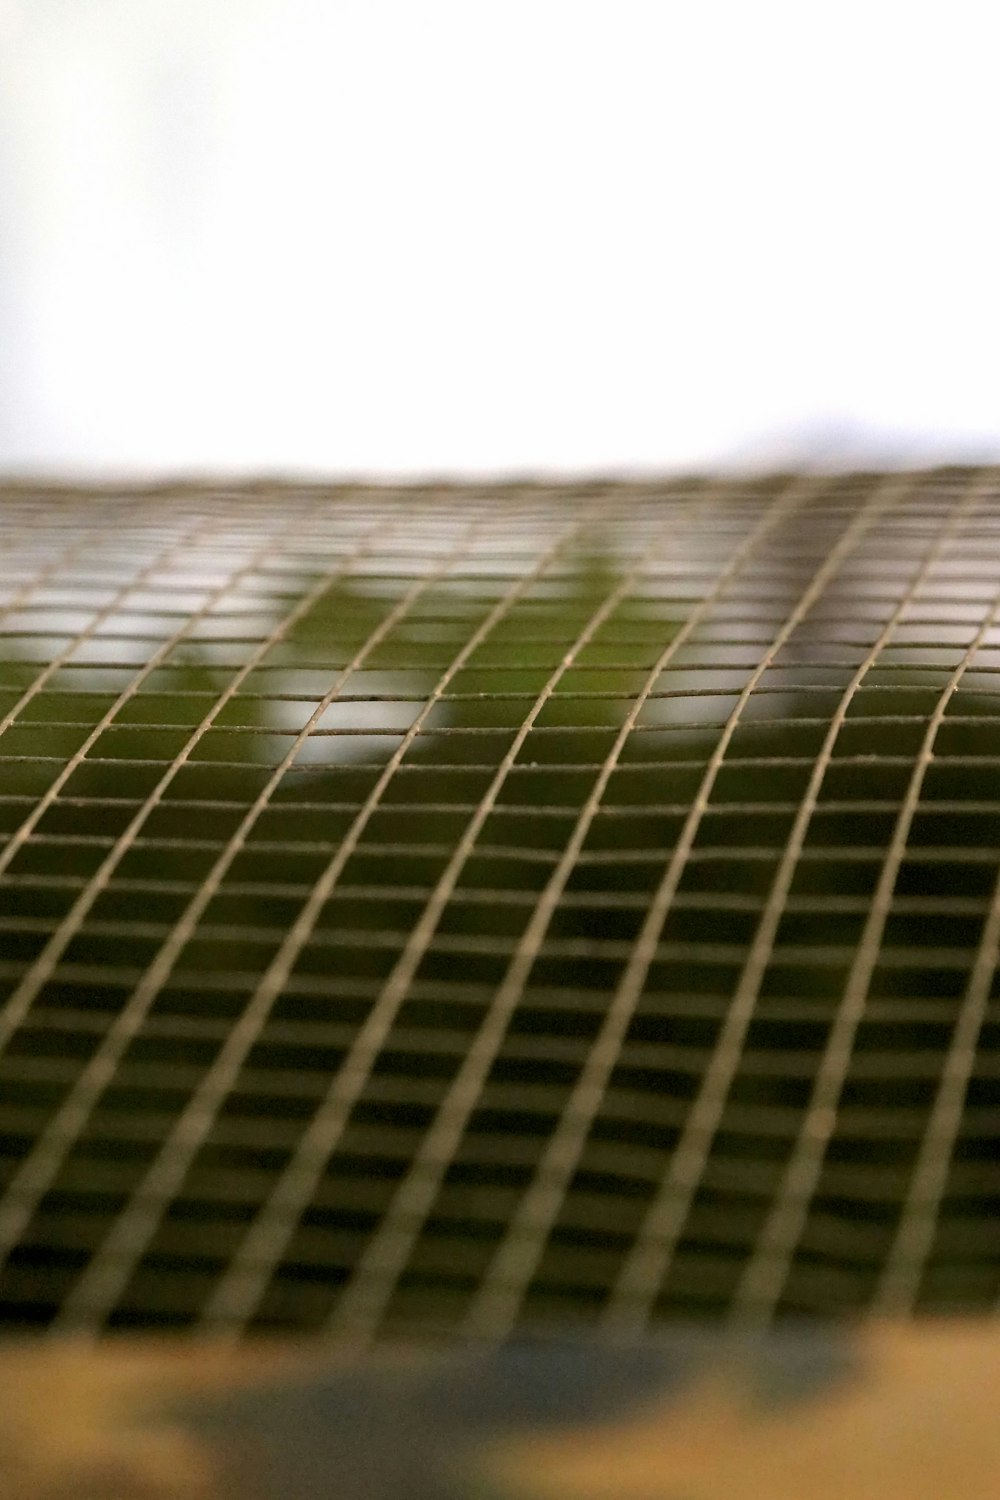 a close up of a metal grate with a blurry background